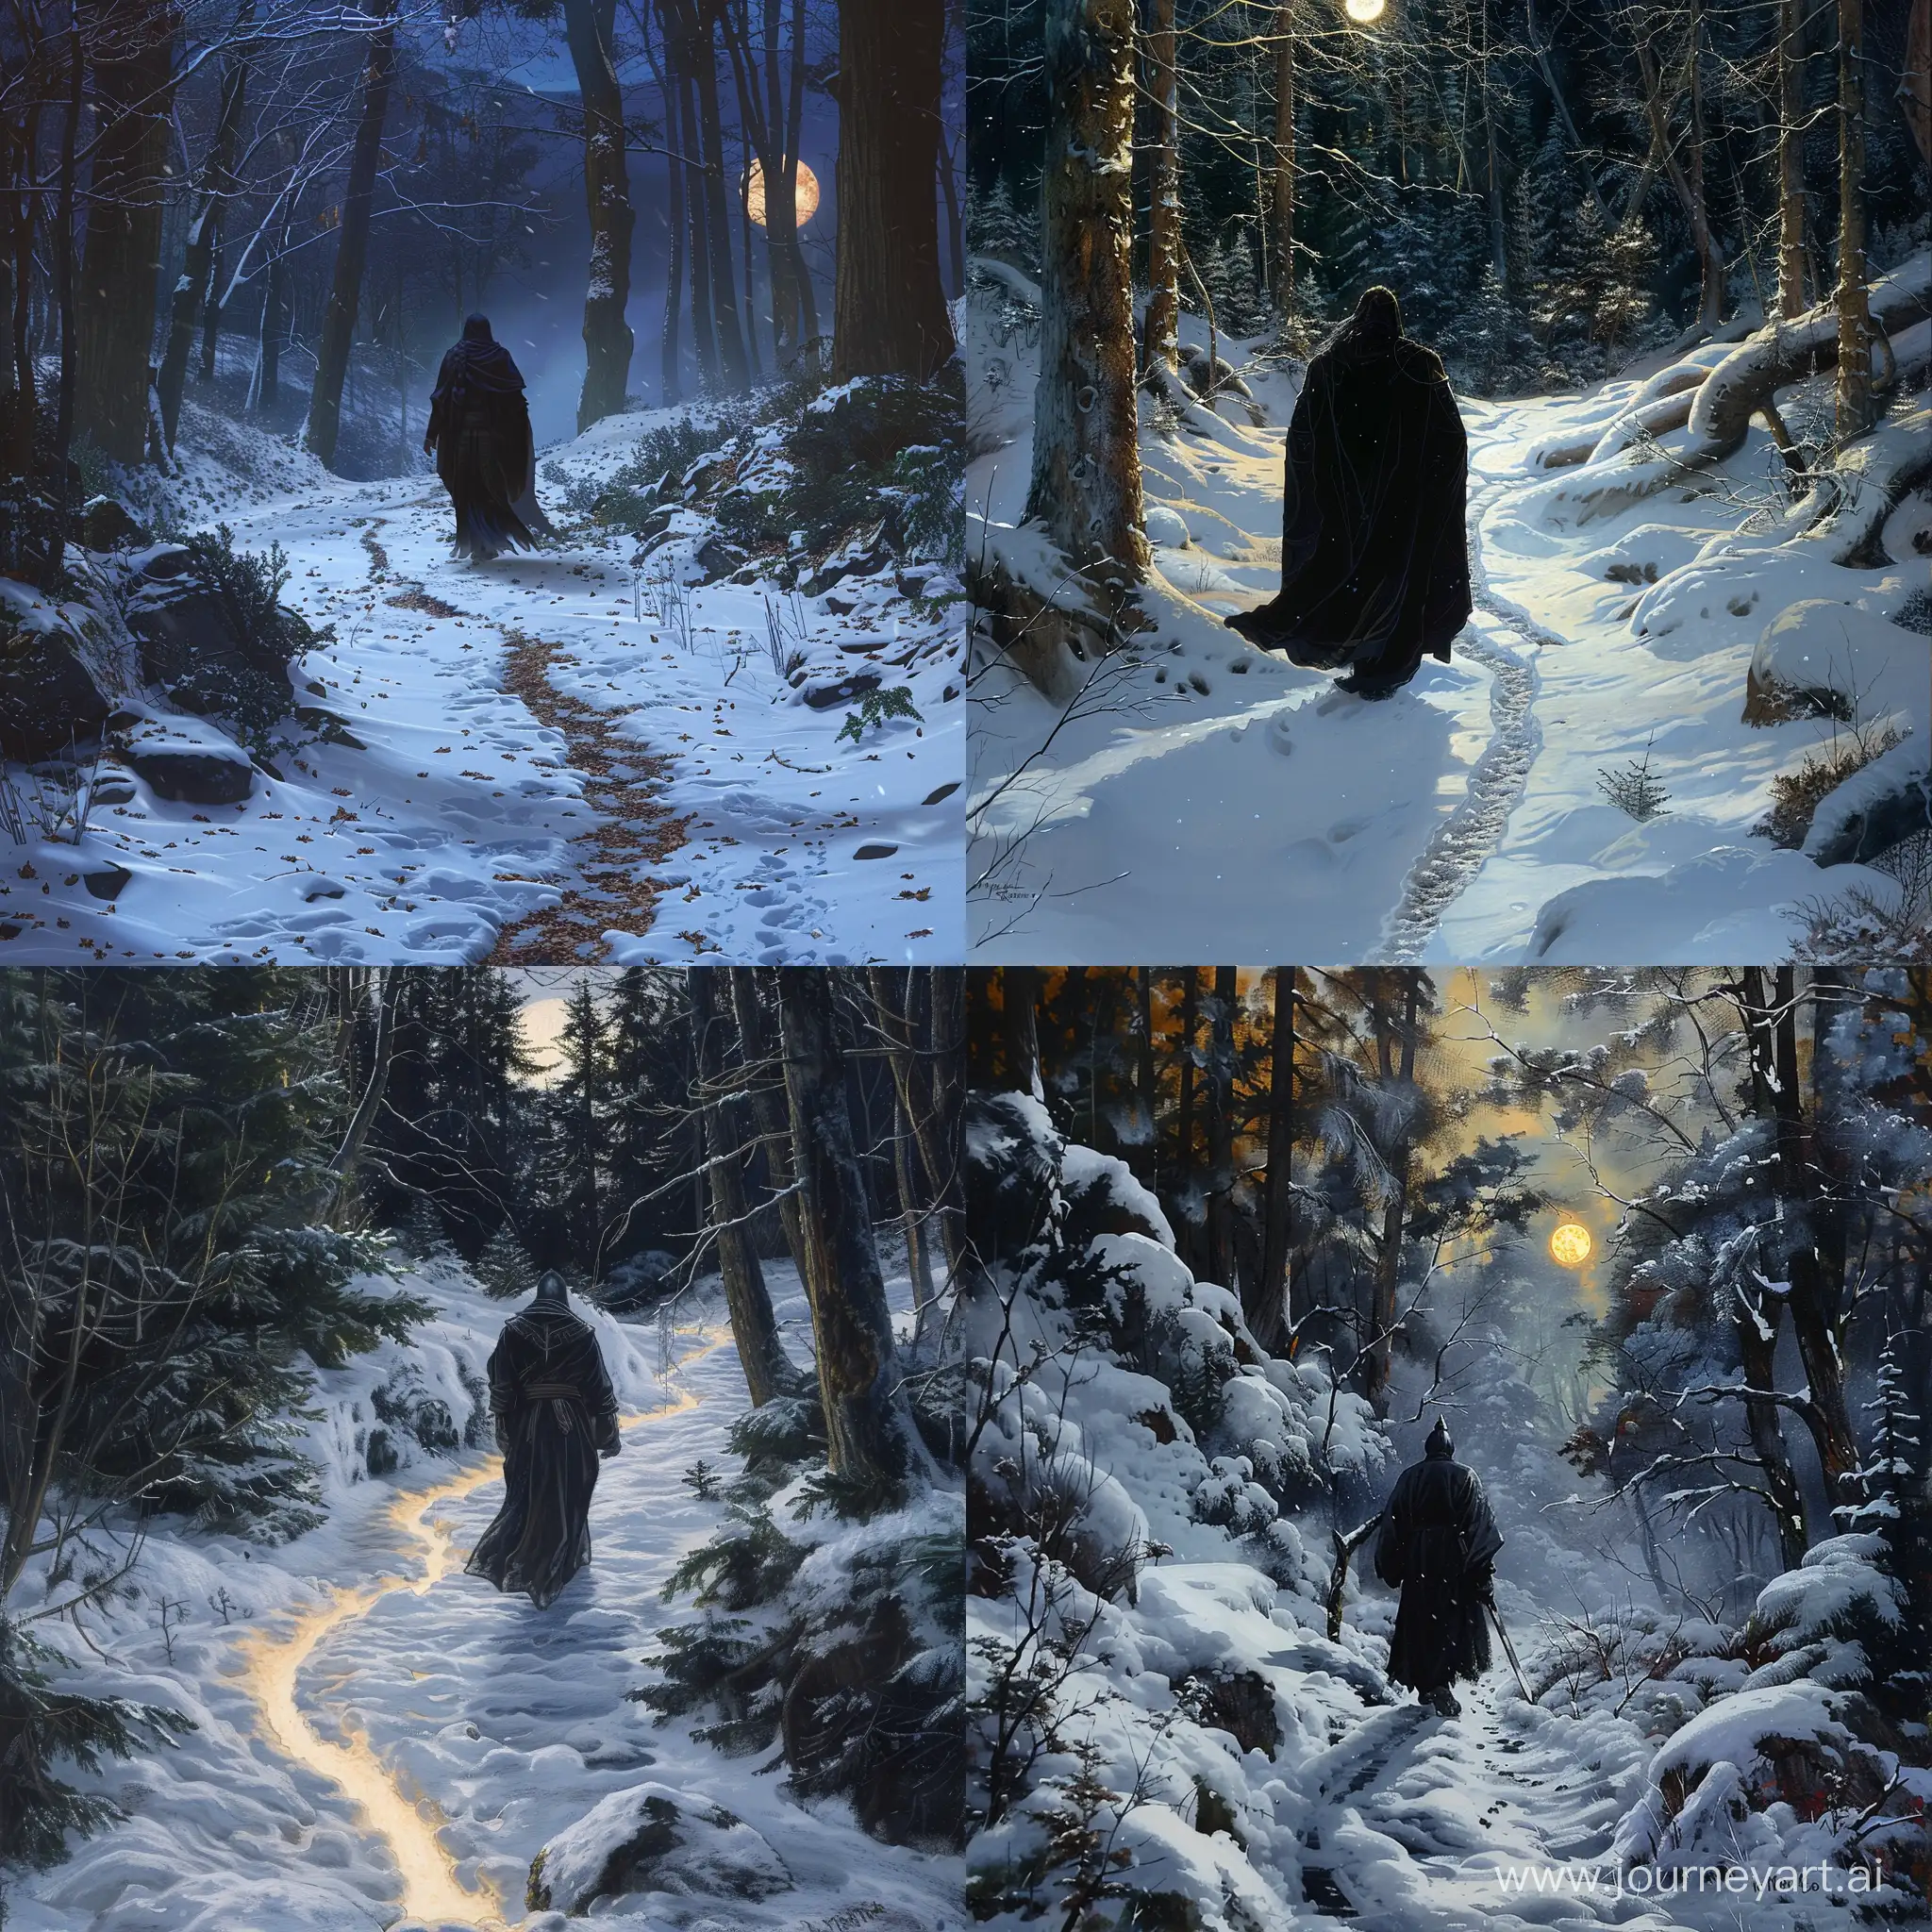 A warrior in a black robe walks along a snow-covered path in the forest. The path is illuminated by the moon